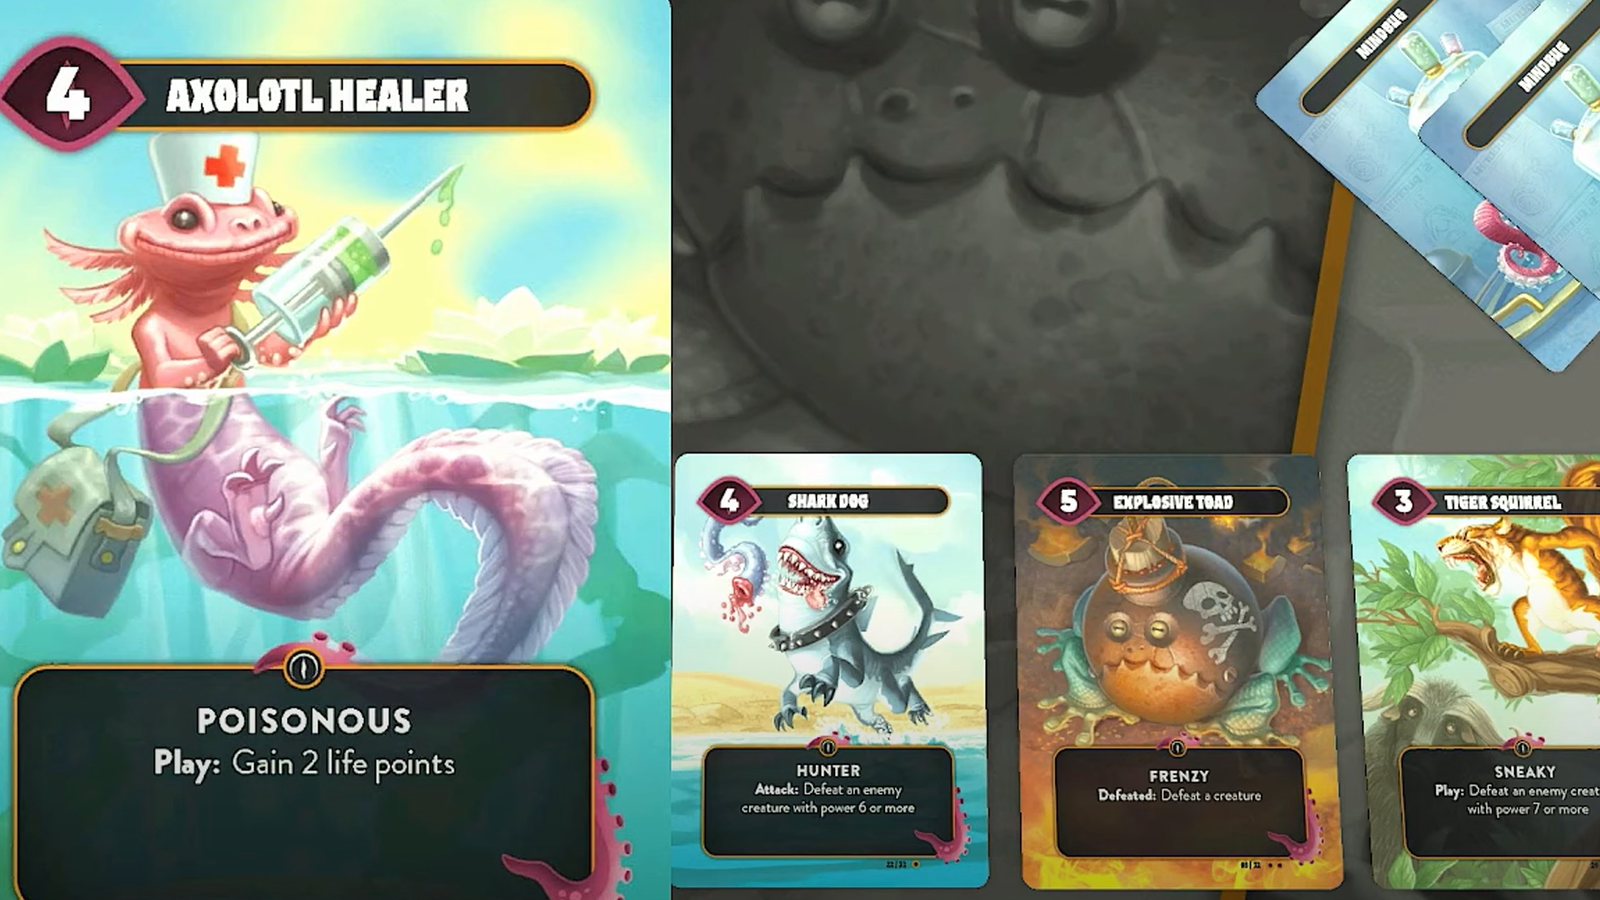 Magic: The Gathering creator has co-designed a new card game